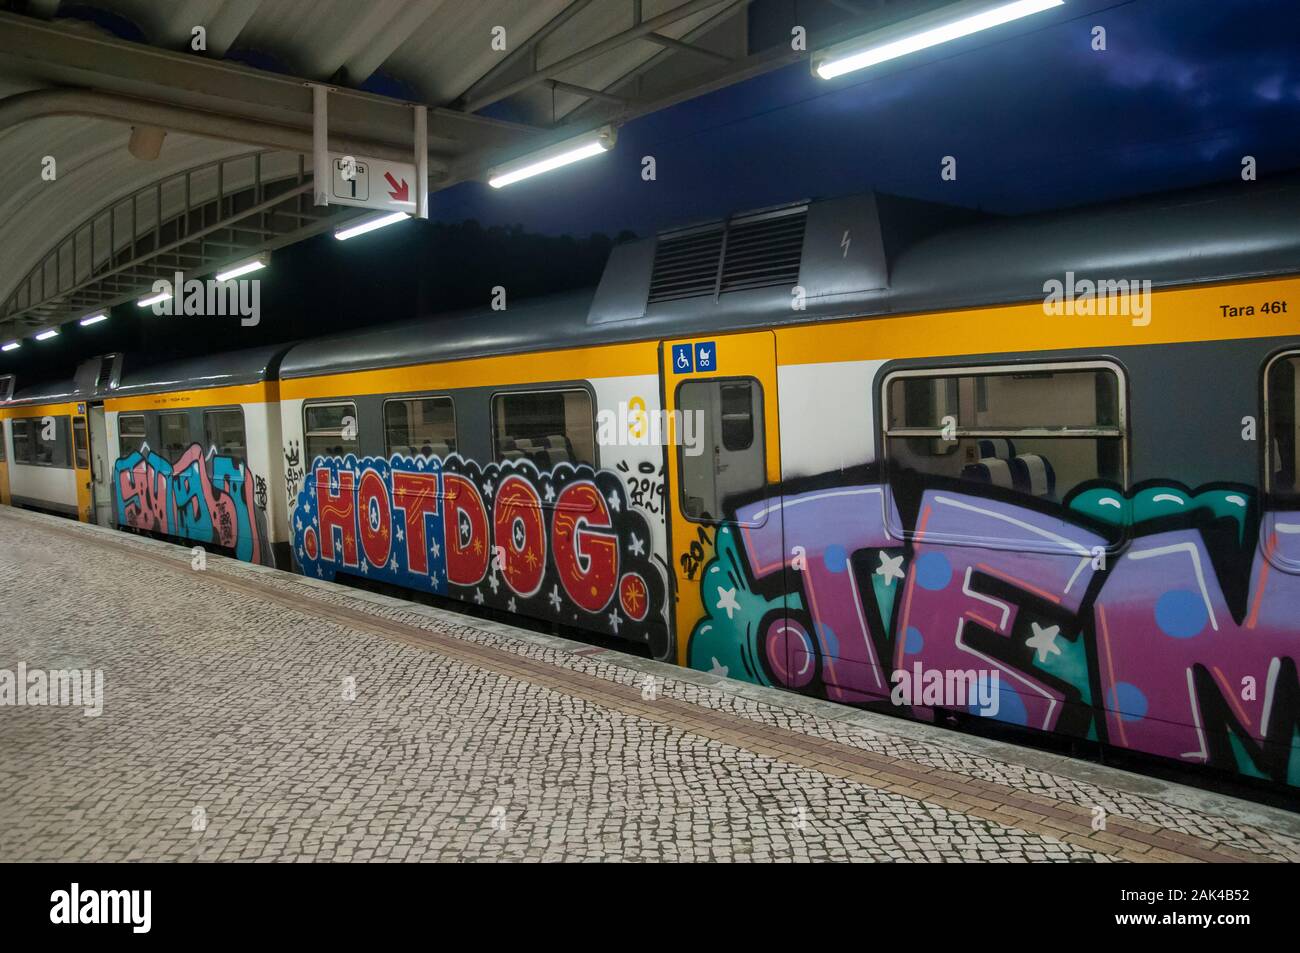 Graffiti painted on a train. Photographed in Sintra train station, Portugal Stock Photo